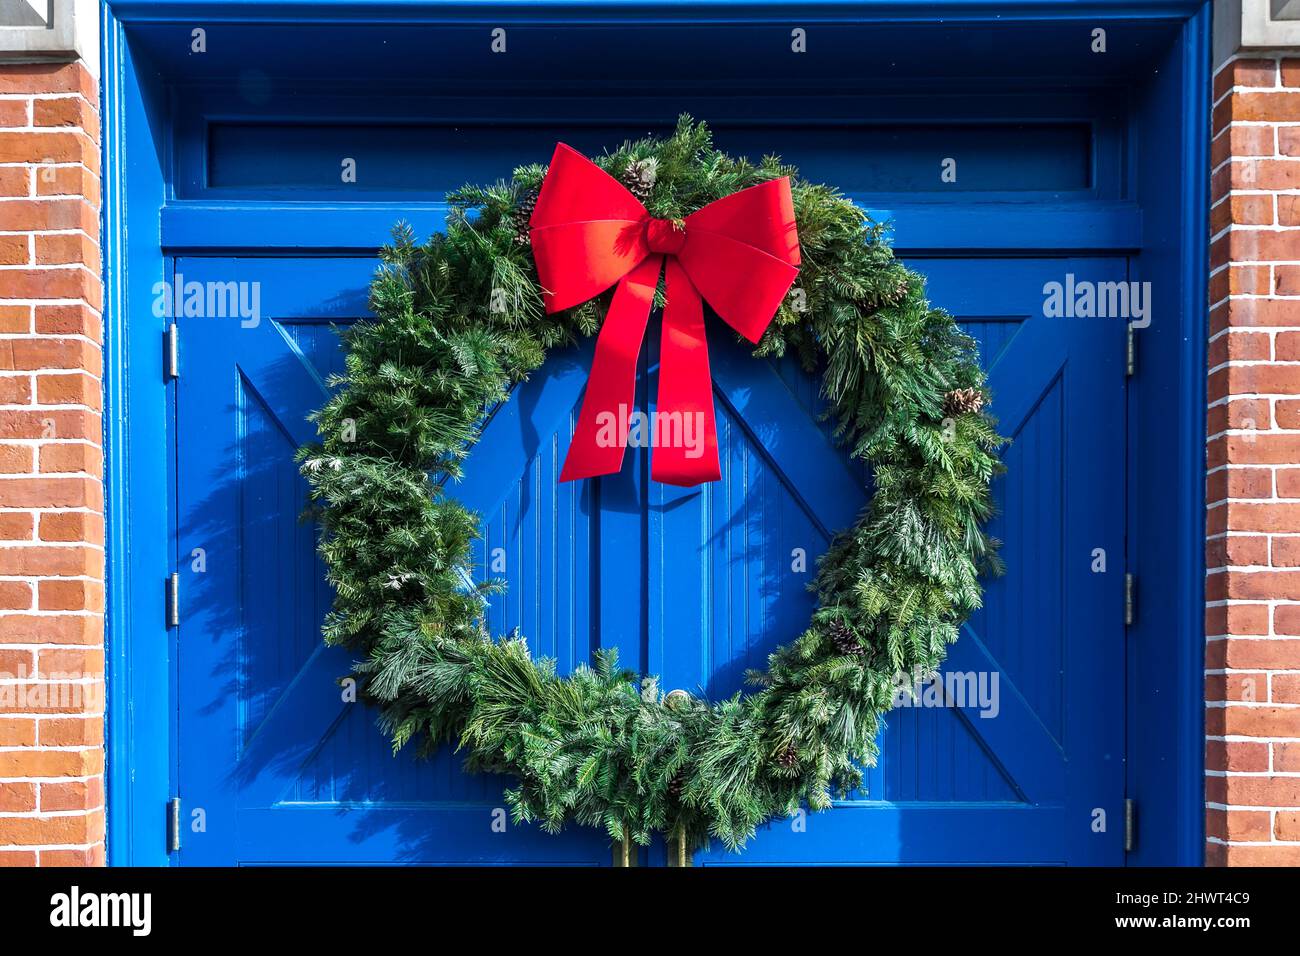 A large green outdoor Christmas holiday wreath with a bright red bow against a pair of bright cobalt blue doors Stock Photo